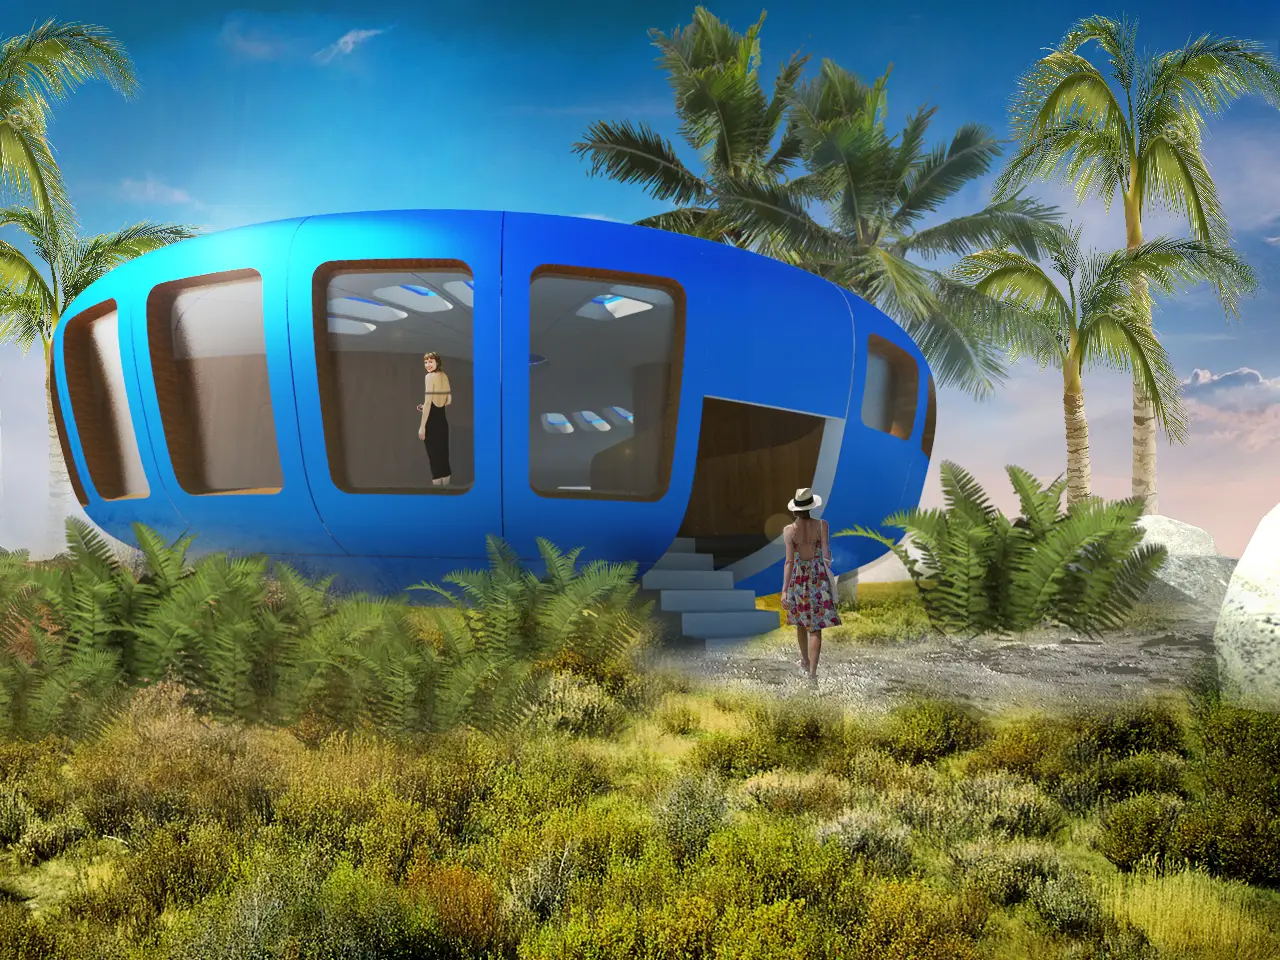 5 tiny off-grid pods that could replace your house